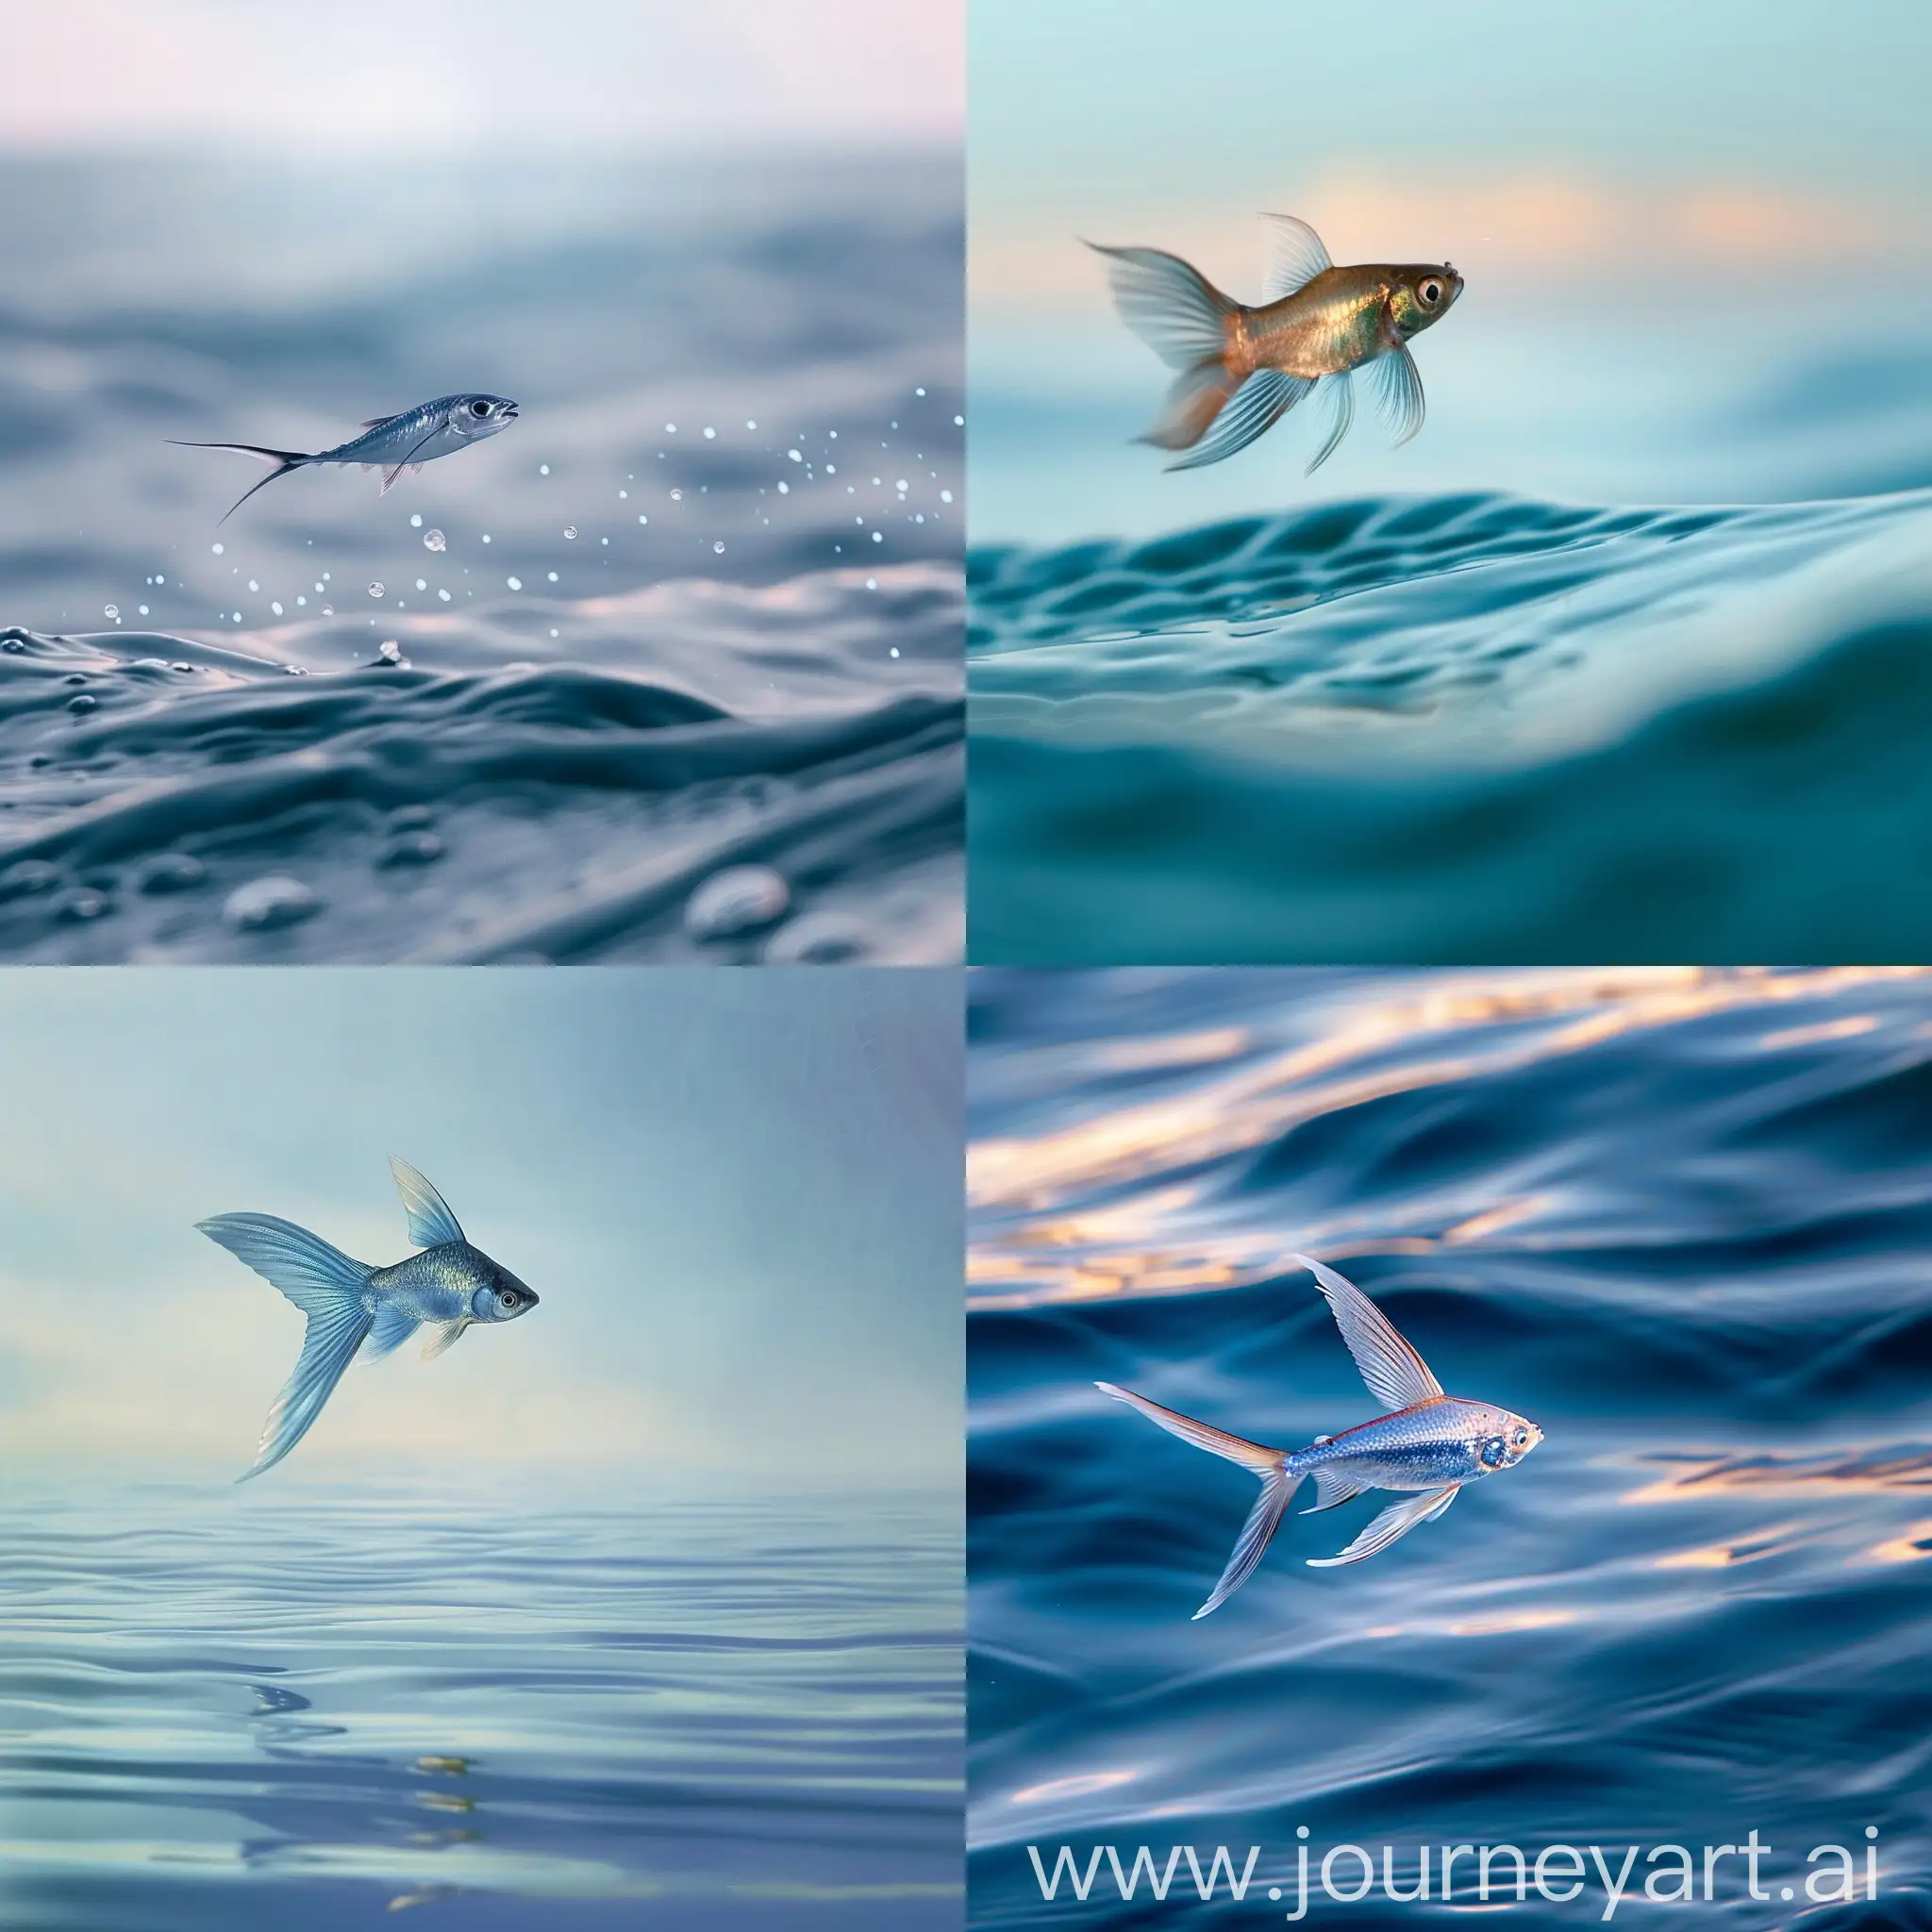 flying fish is flying on the surface of the water